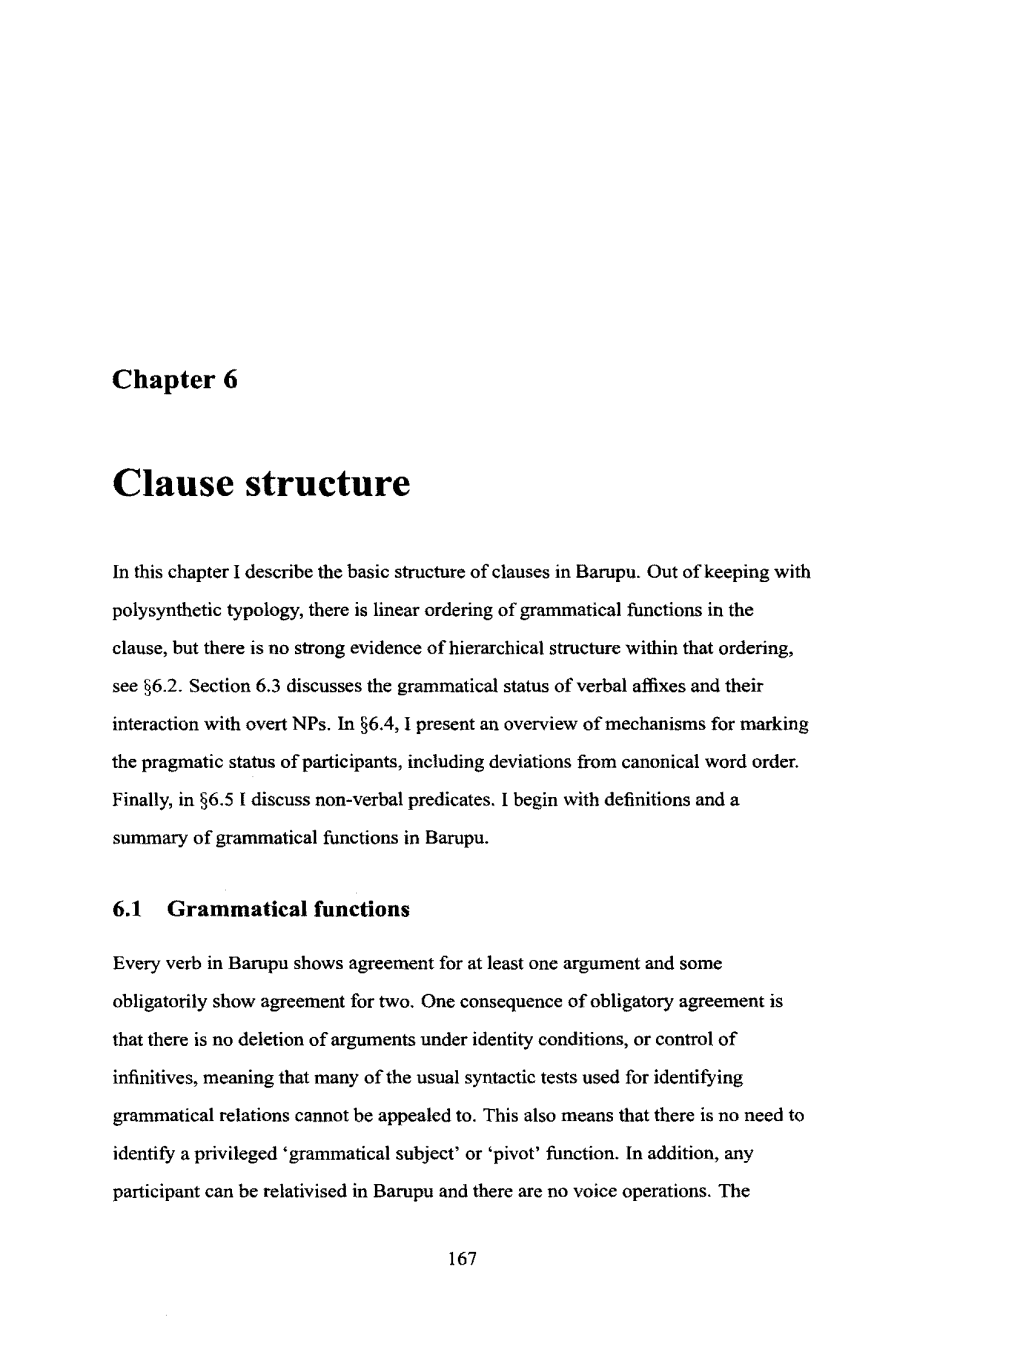 Clause Structure